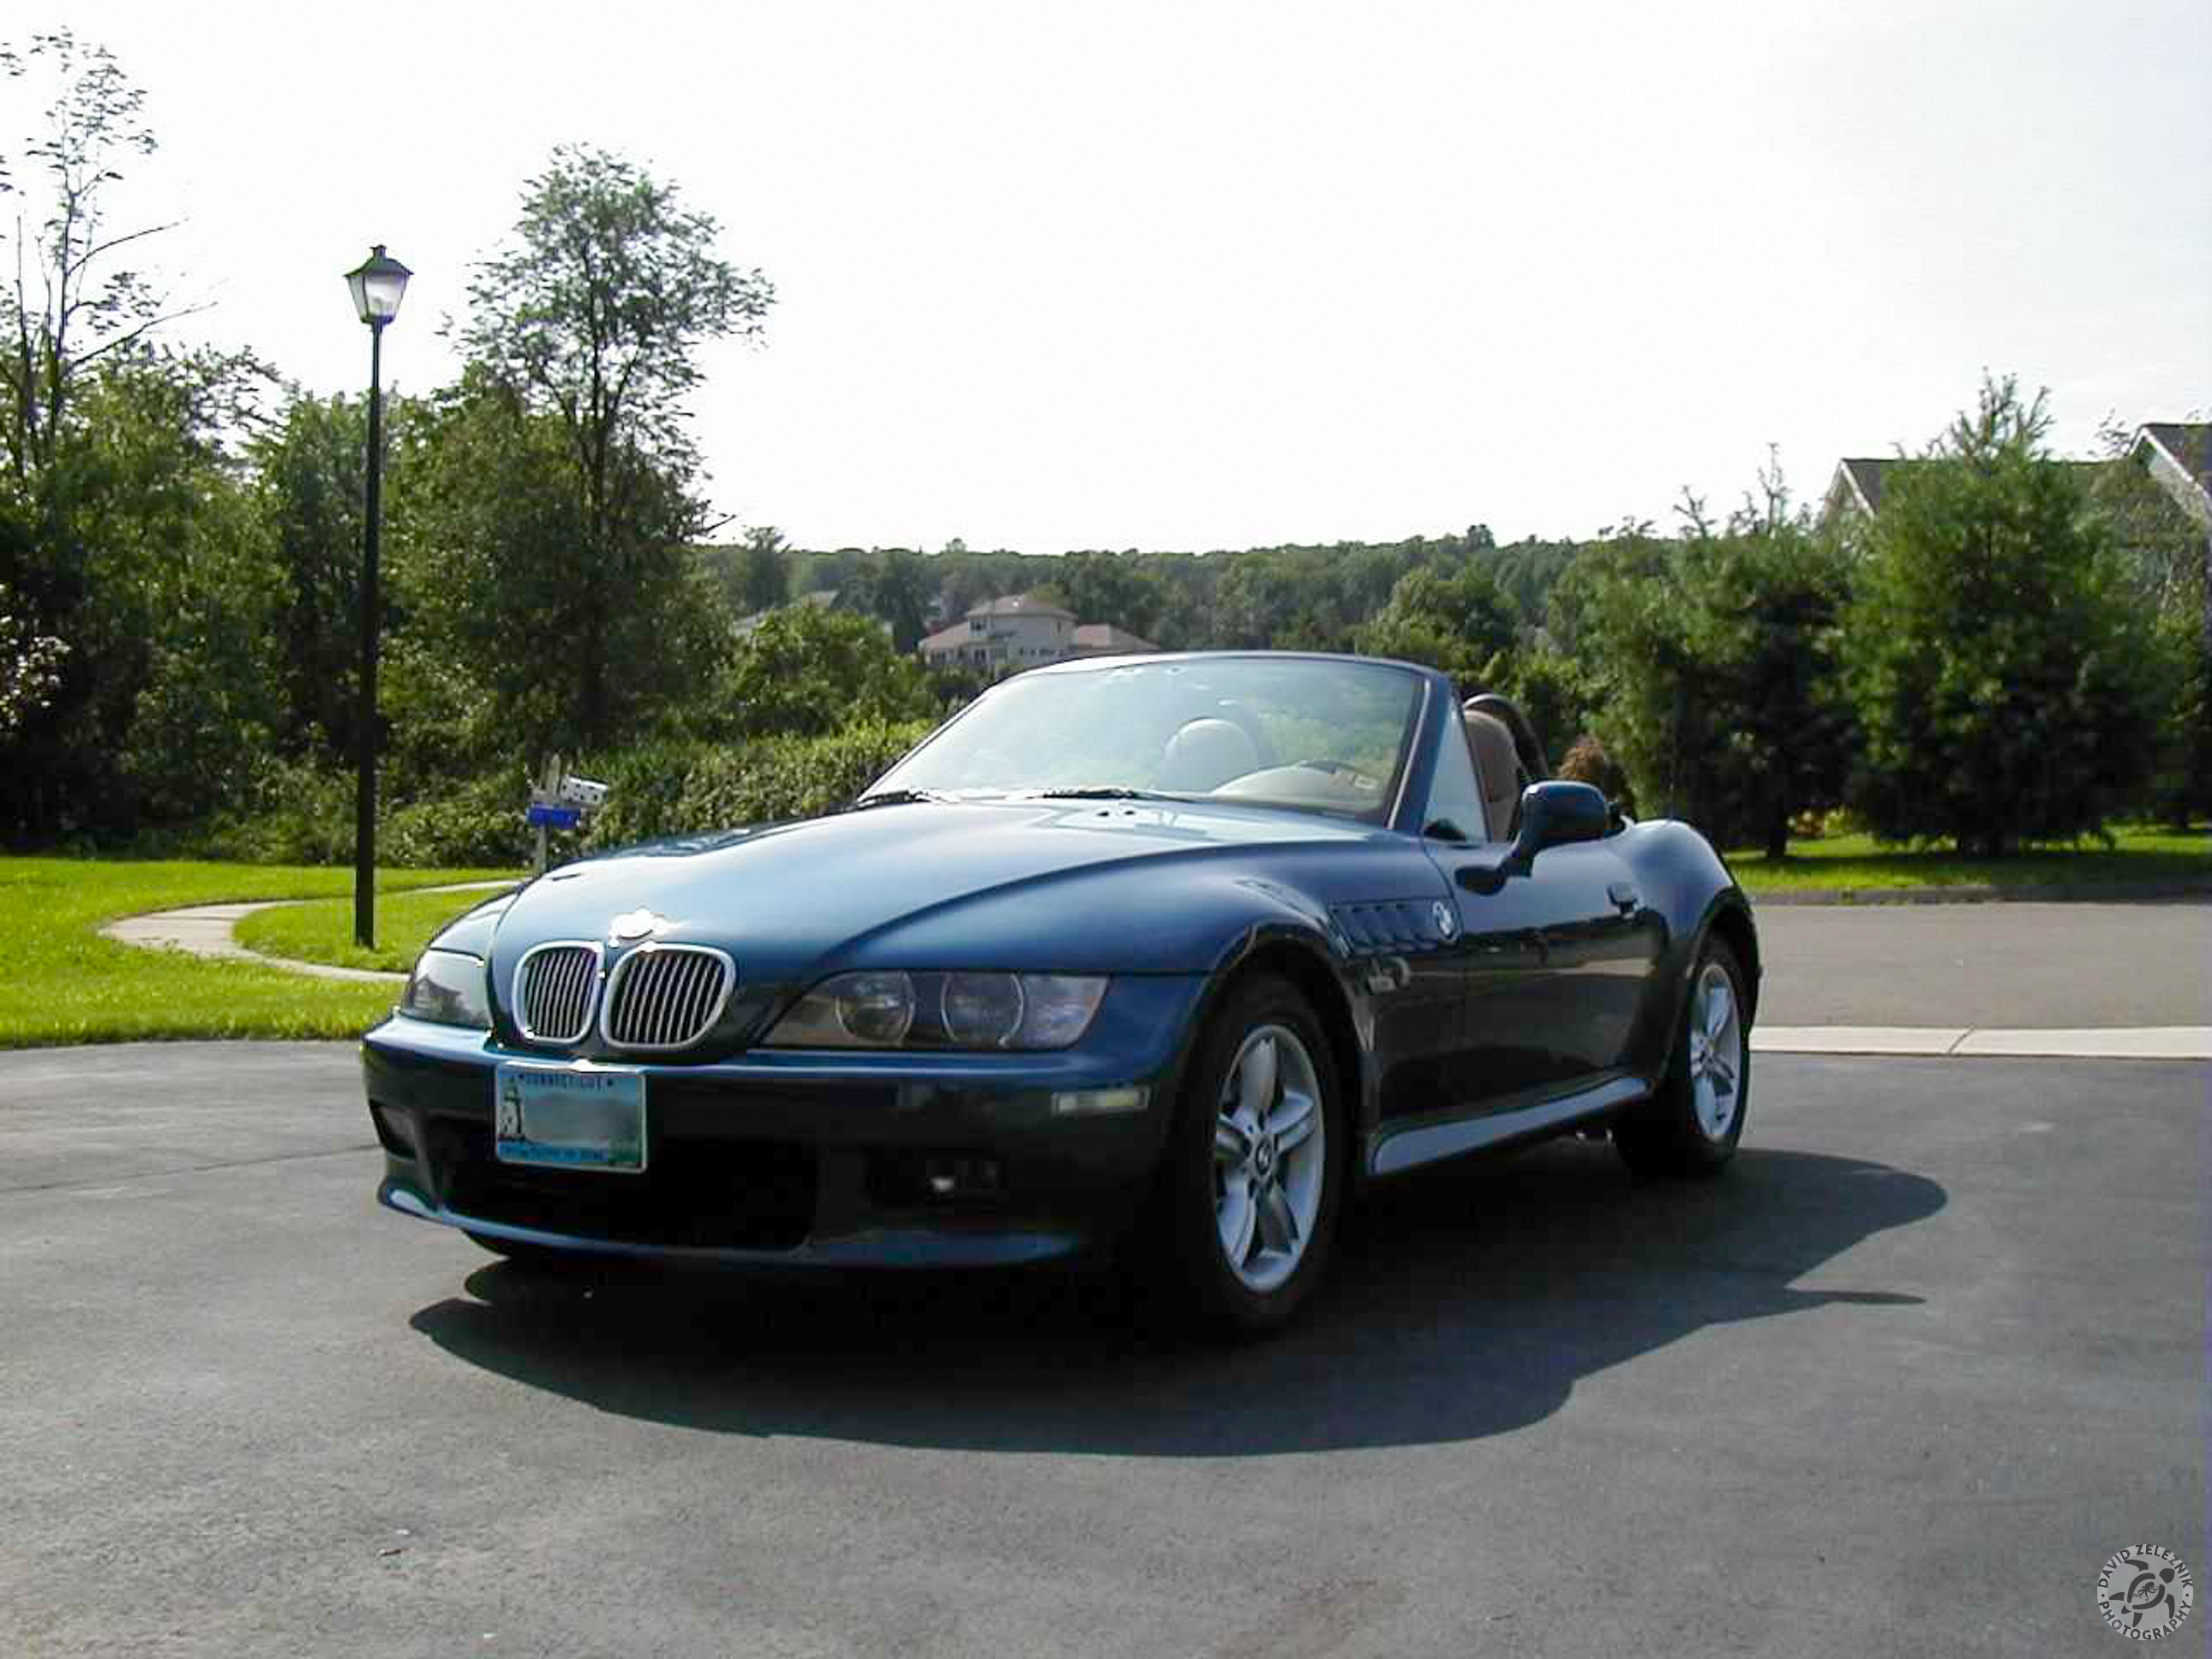 z3_20000804 Fast-forward 8 months and we are in August, 2000. The sun is shining, the hardtop is off, and my wee-little bald spot is getting nice and red from all the top-down driving fun I am having. You can notice that the factory 16" wheels are back on the car. I have also applied a set of Chrom-Design front grill inserts that I purchased from HMS Motorsport .